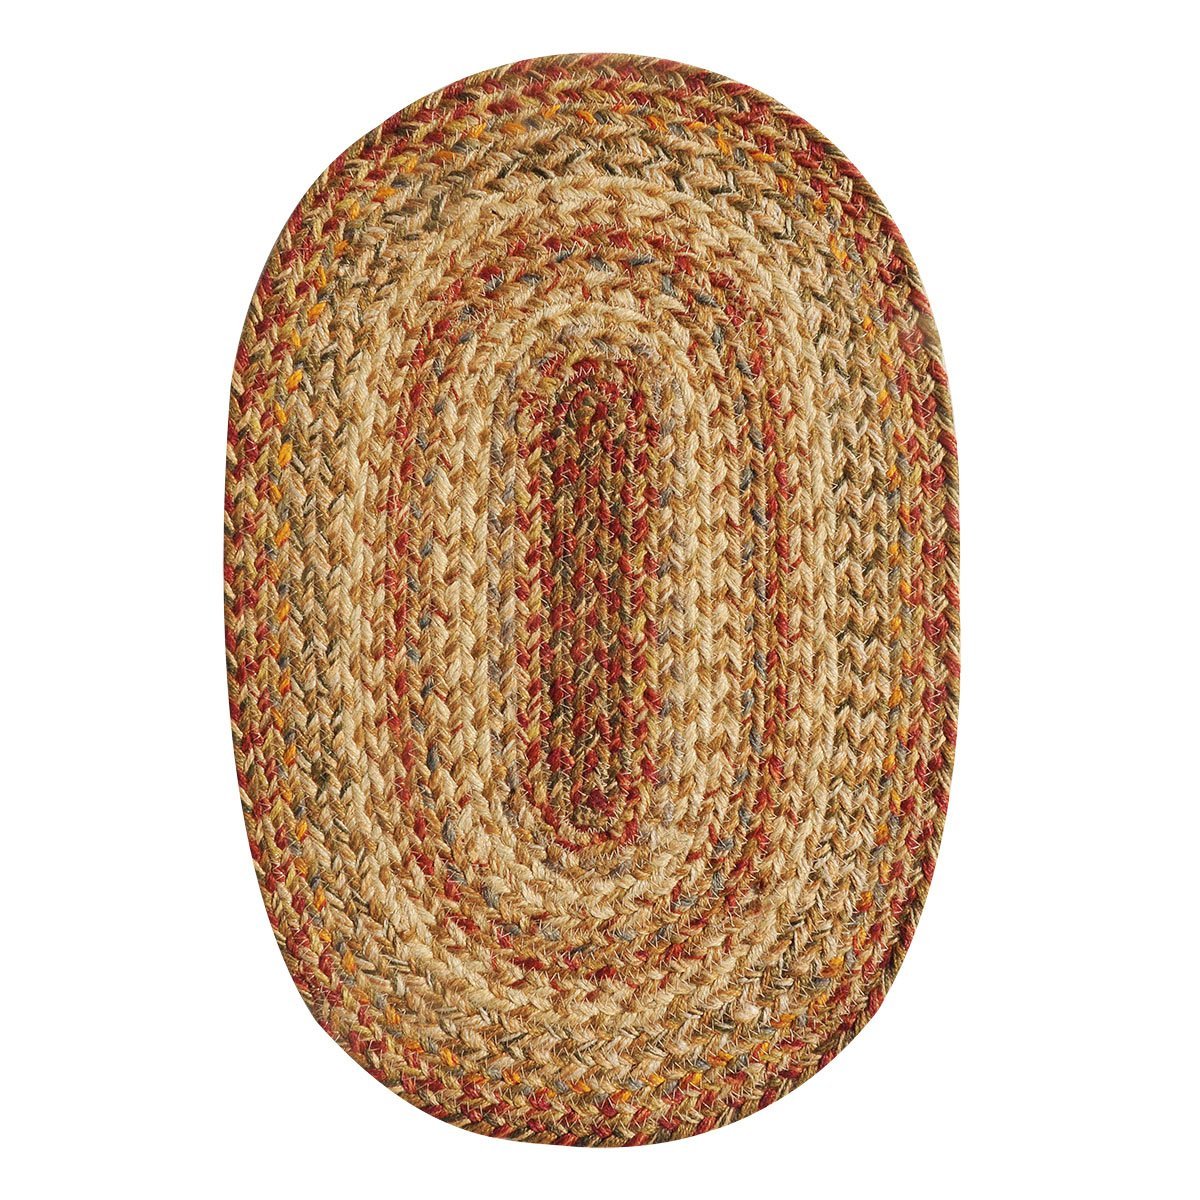 594075 Harvest Hudson Jute Braided Rugs - Placemats - Oval